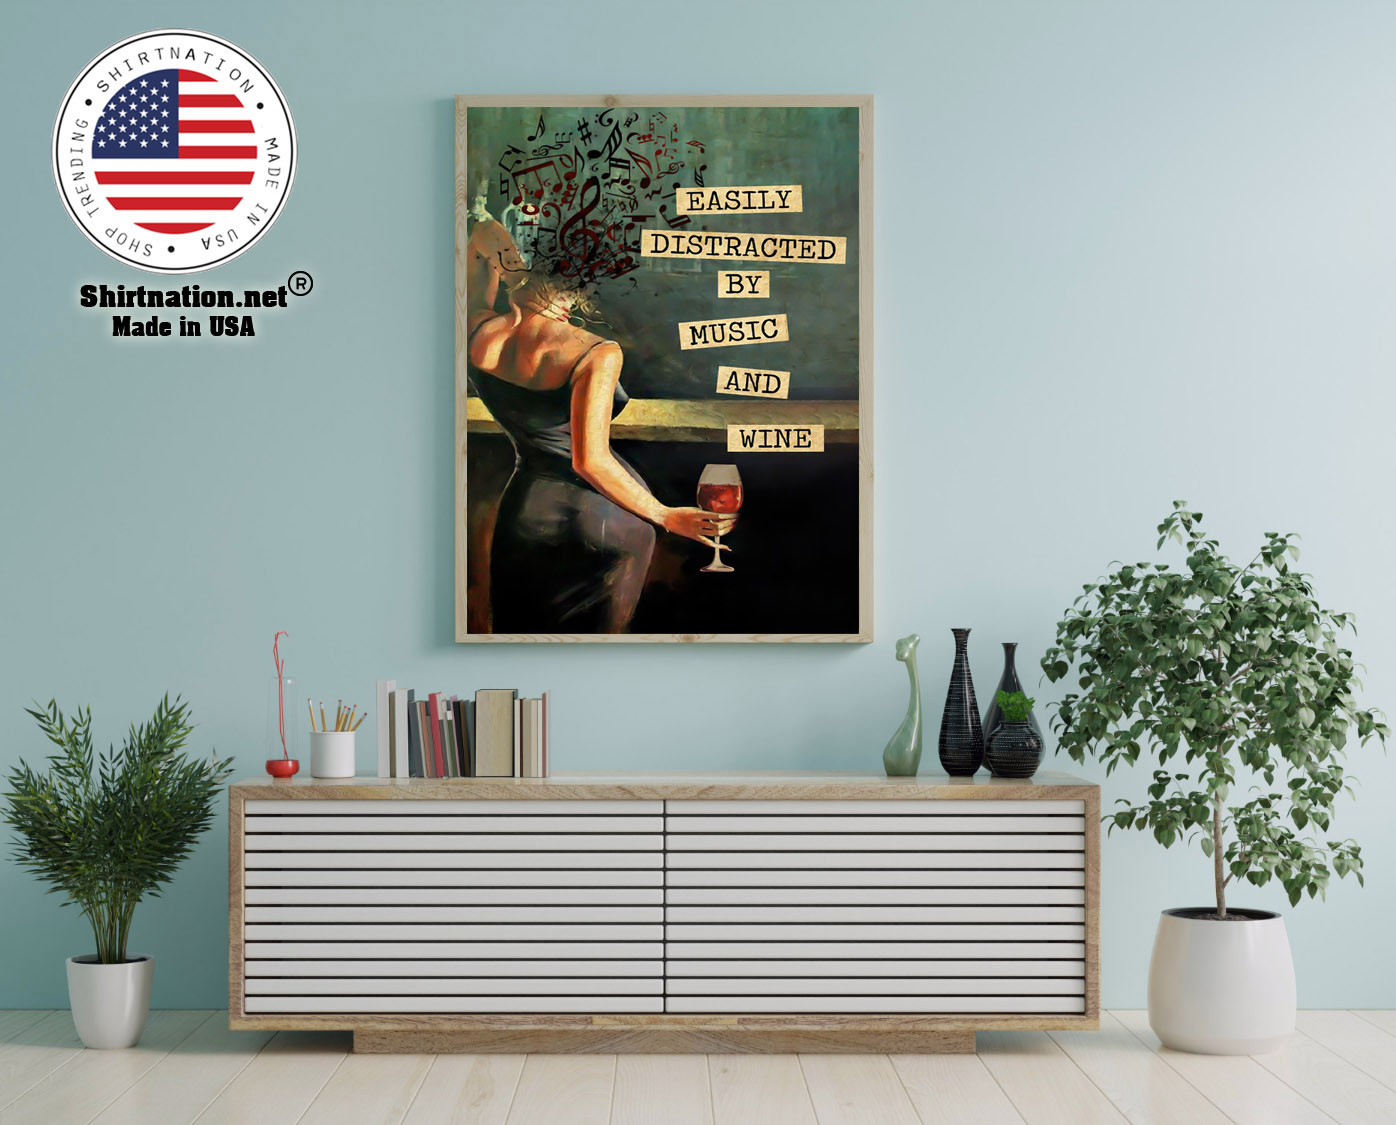 Vintage easily distracted by music and wine poster 16